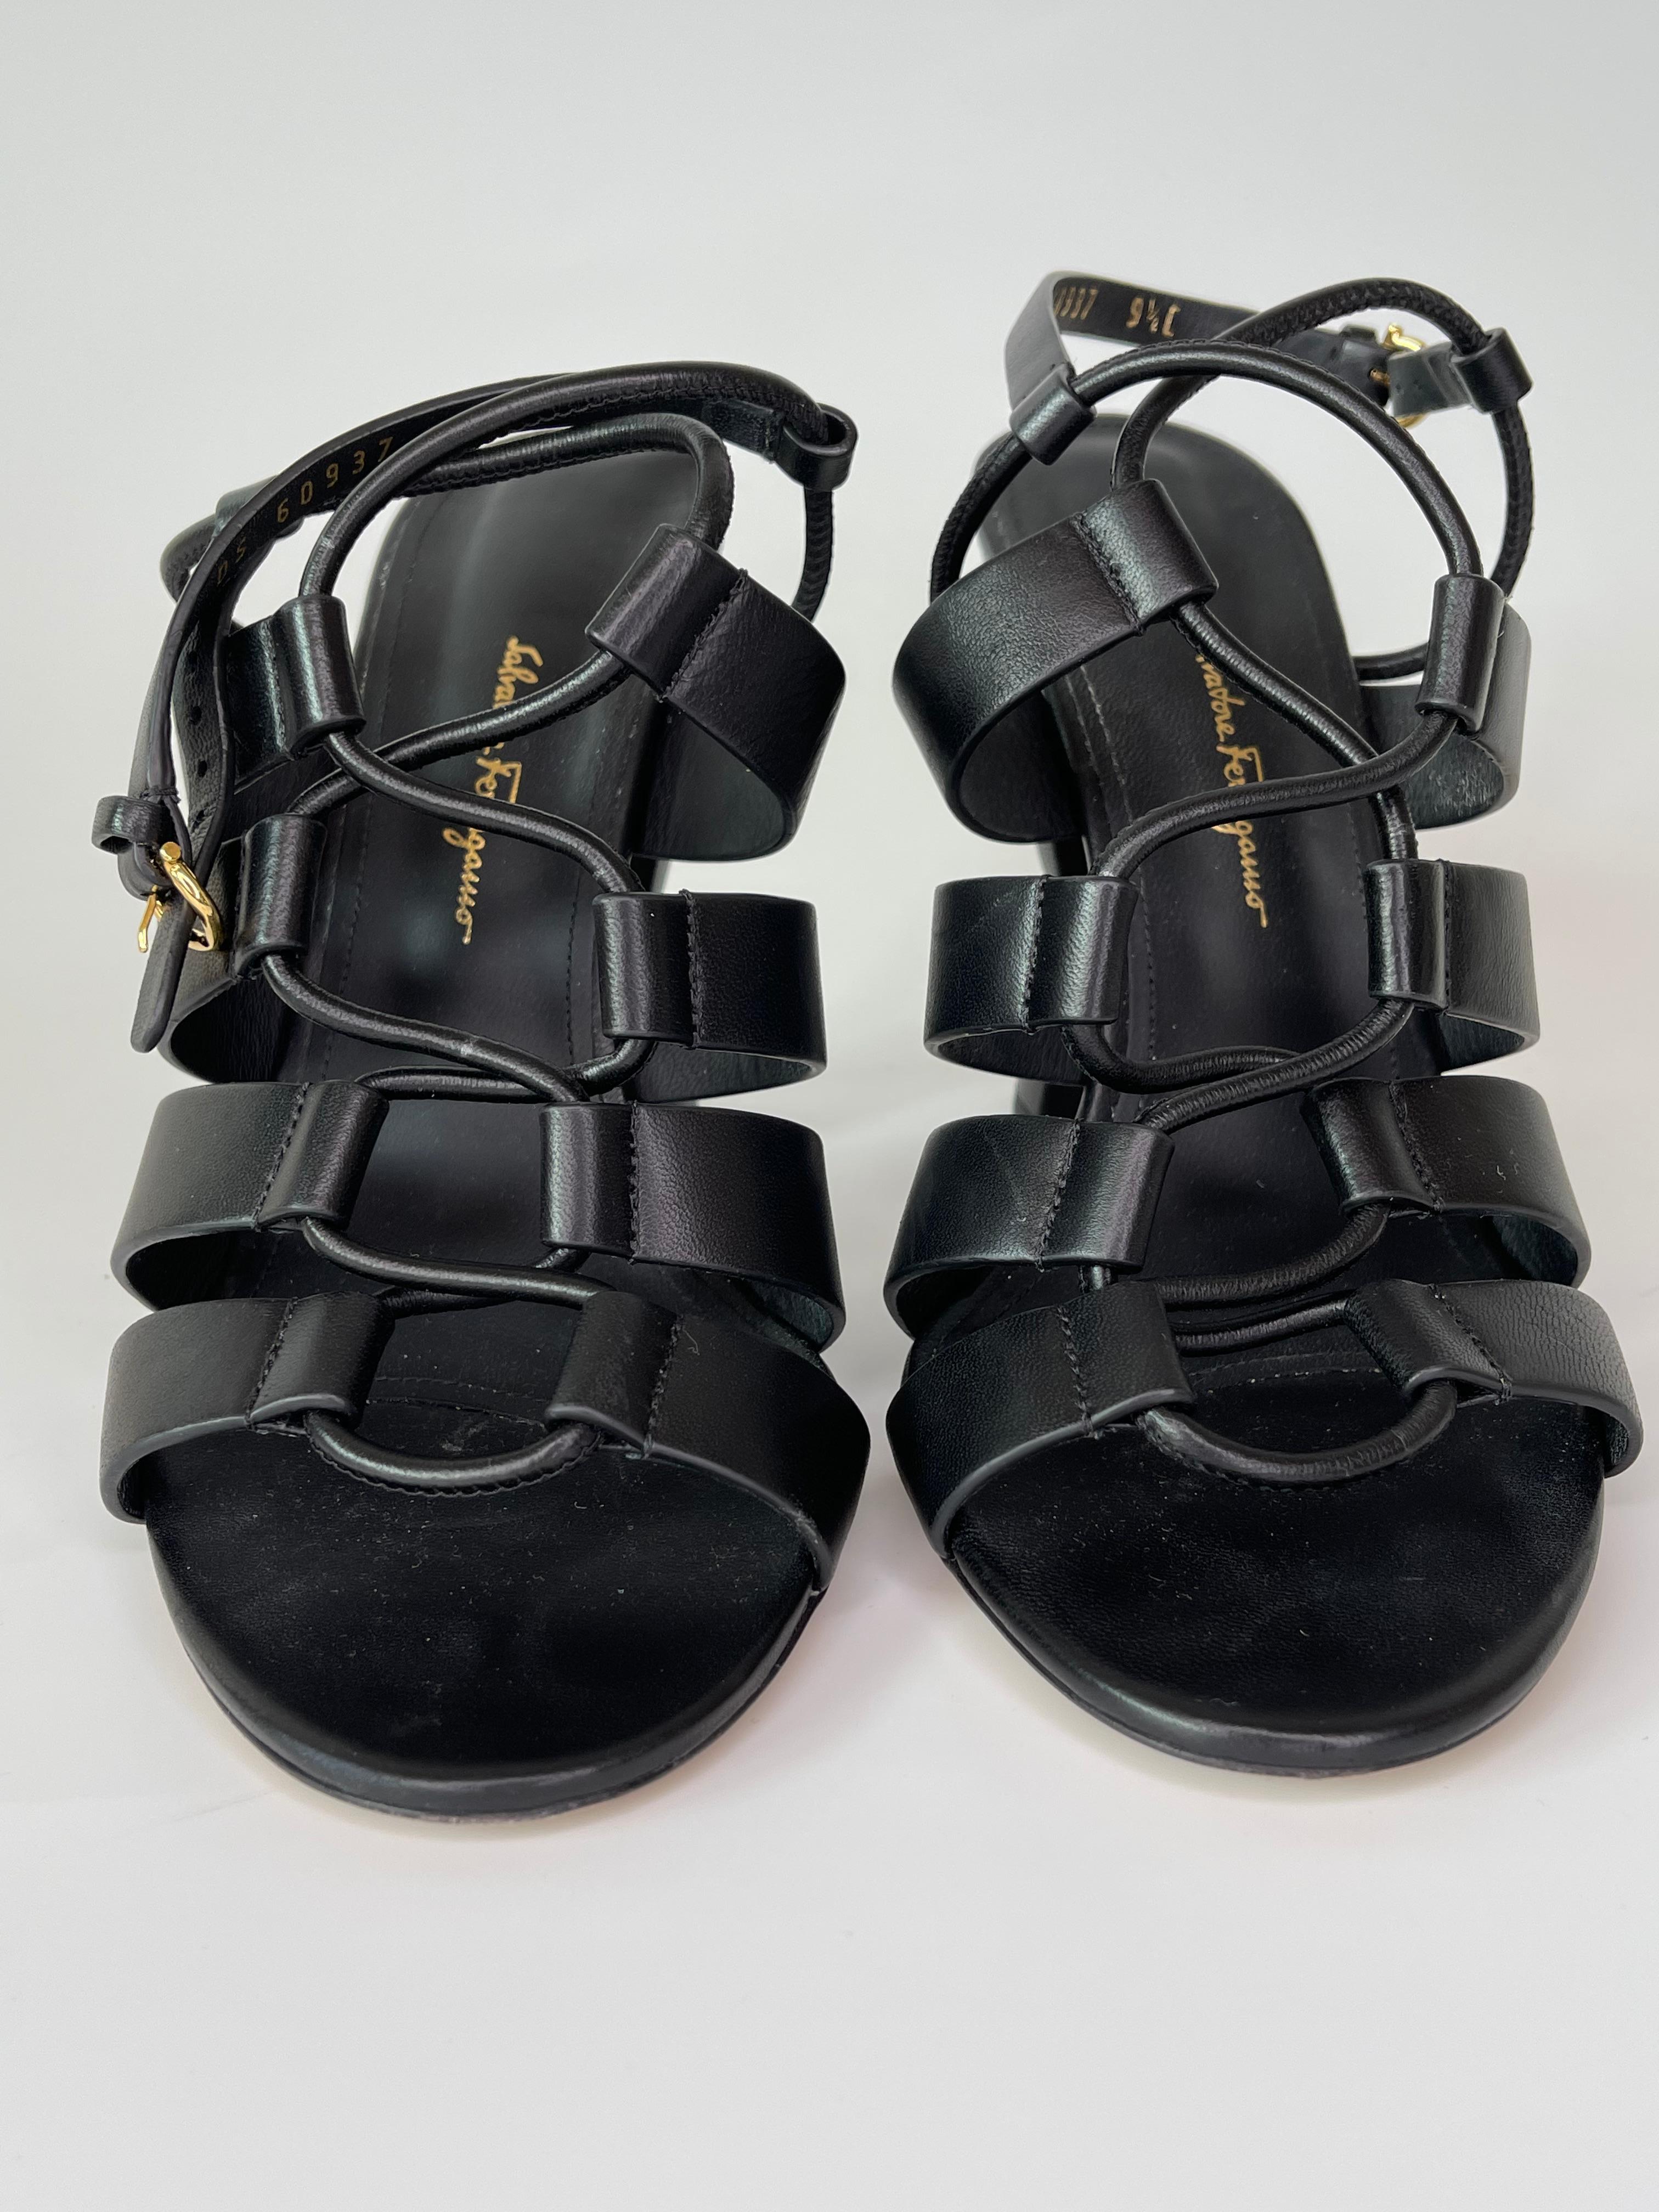 Chanel Sandals Size 8 - 6 For Sale on 1stDibs